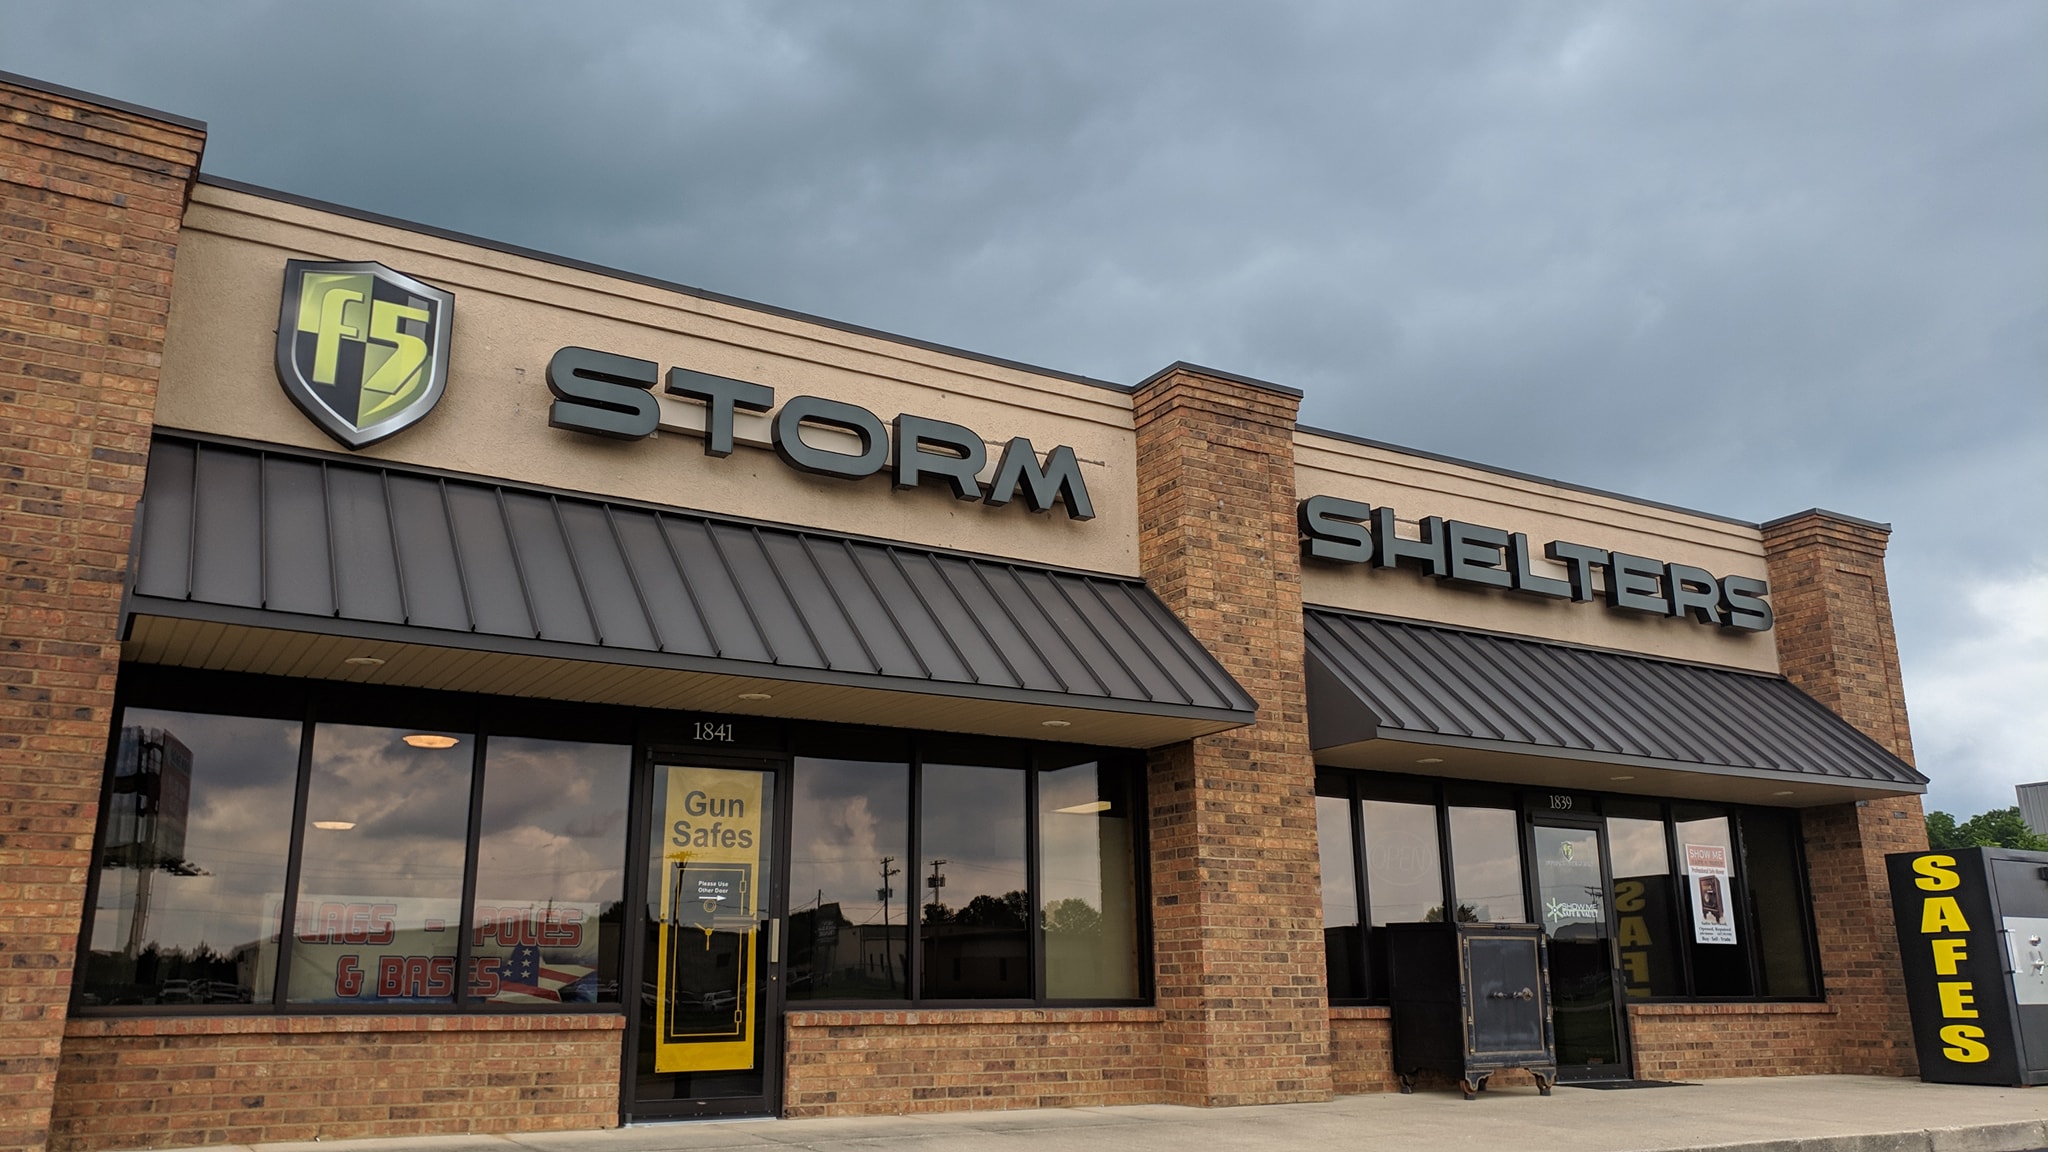 My f5 Storm Shelters – The best storm shelters on the market